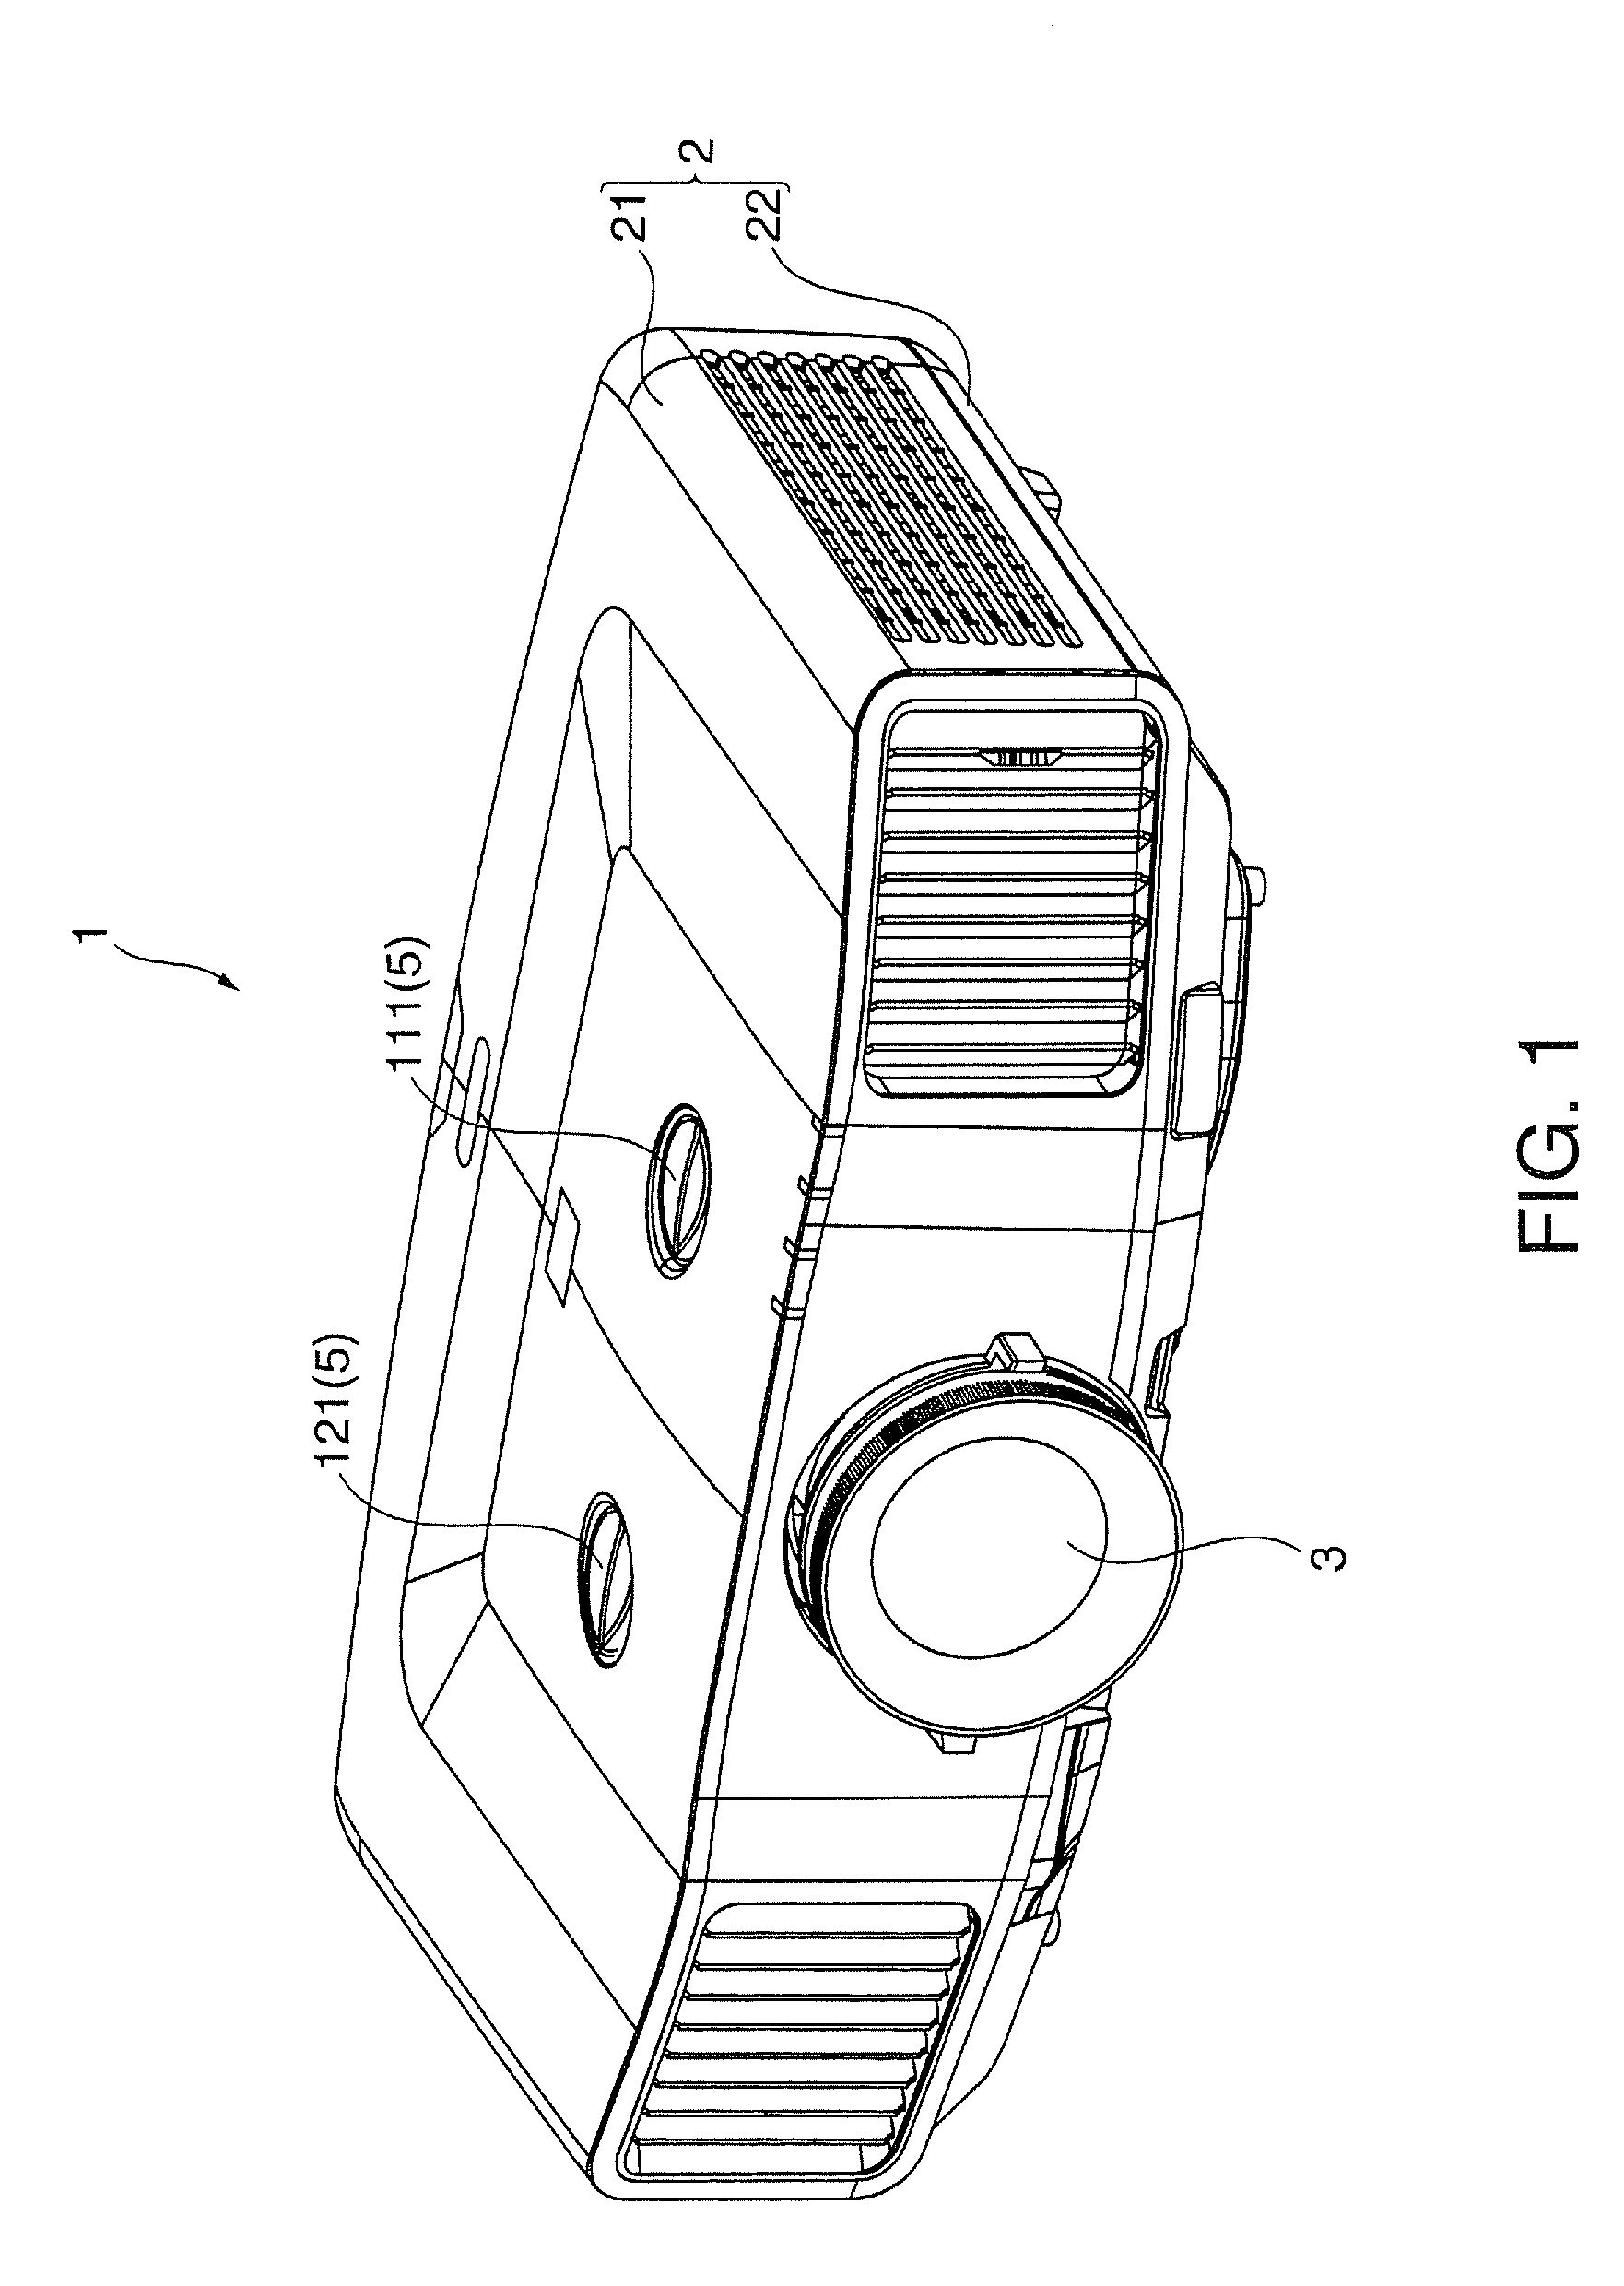 Projector with a projection position adjusting device